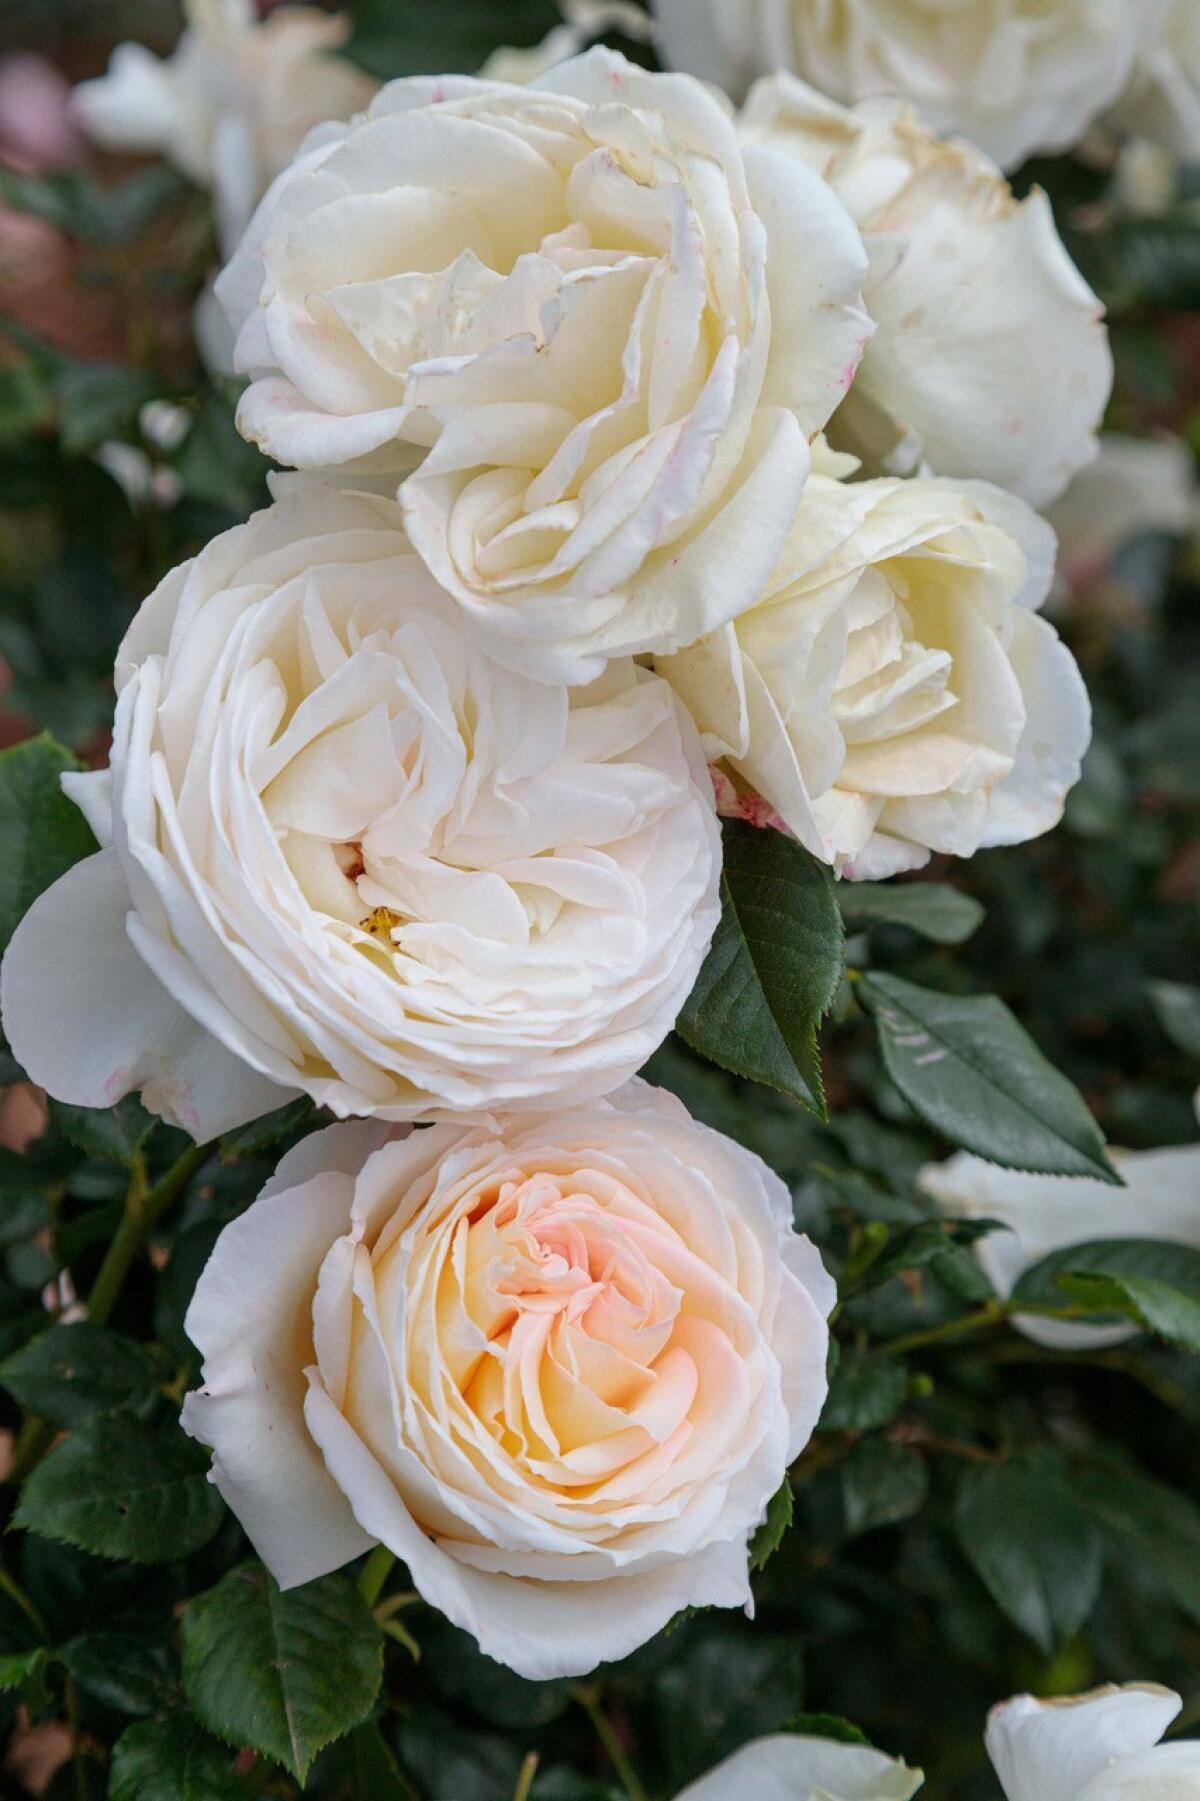 ‘Top Cream’ has large, old-fashioned, abundant-petaled blooms that are creamy white with an occasional light pink blush.